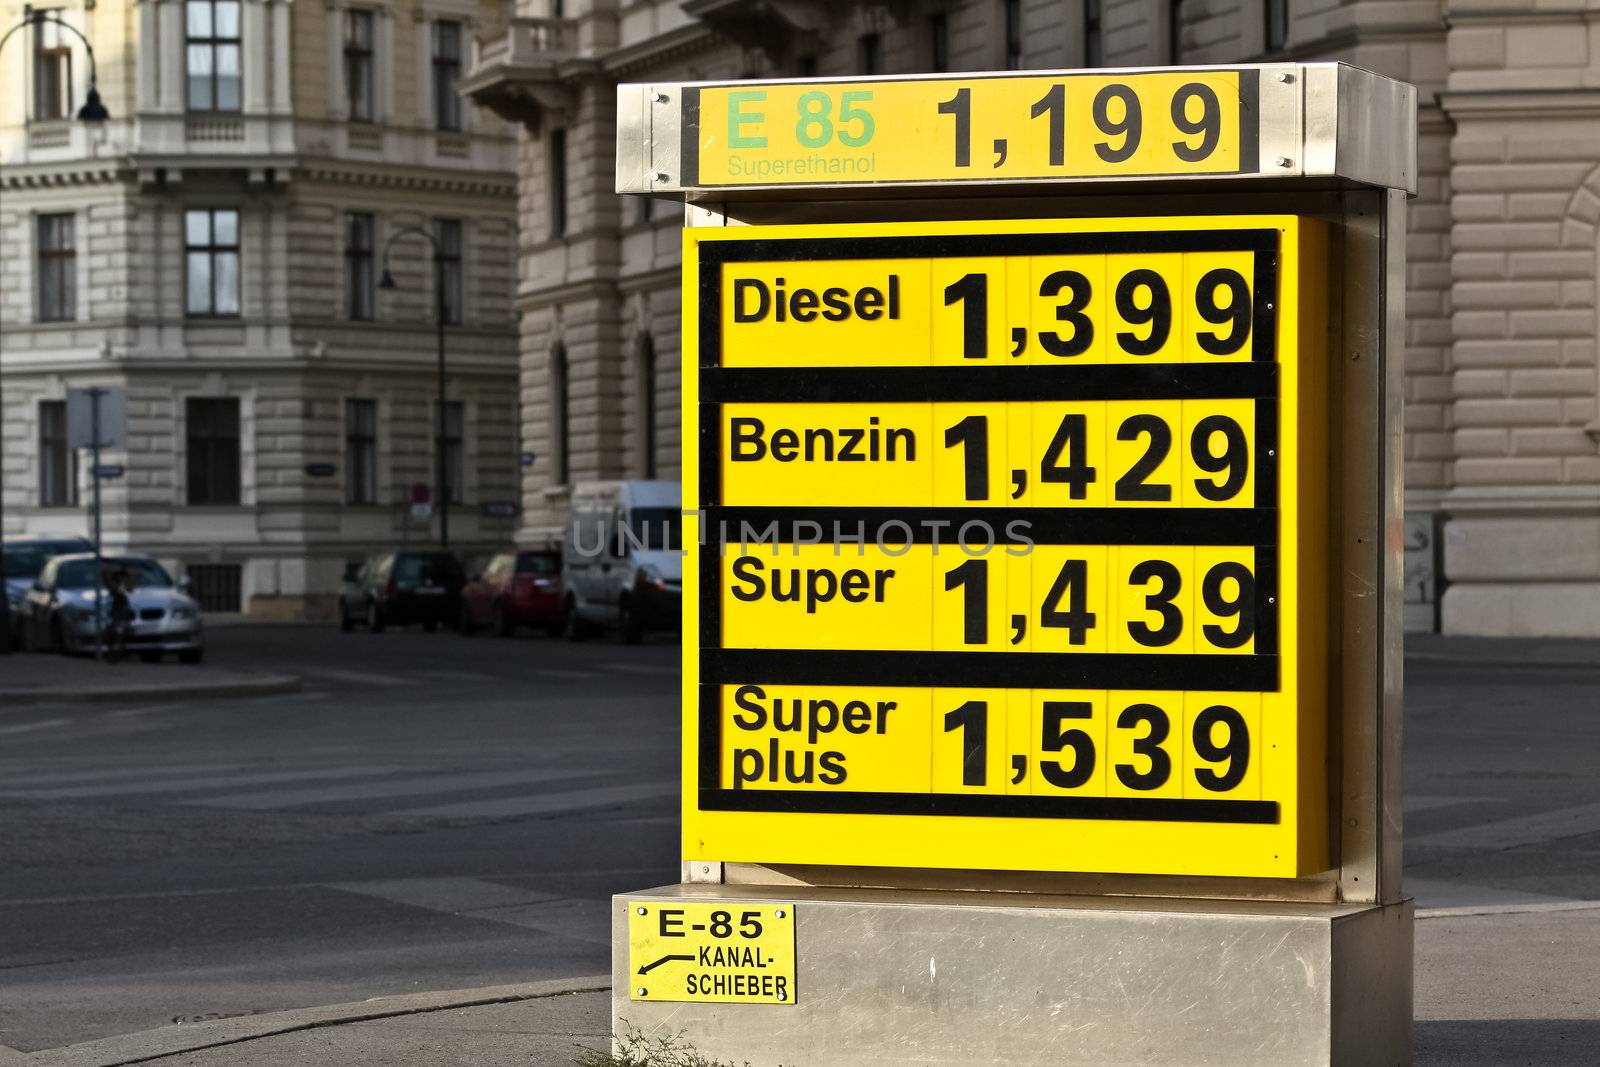 A display of gas prices in front of a central station in Vienna